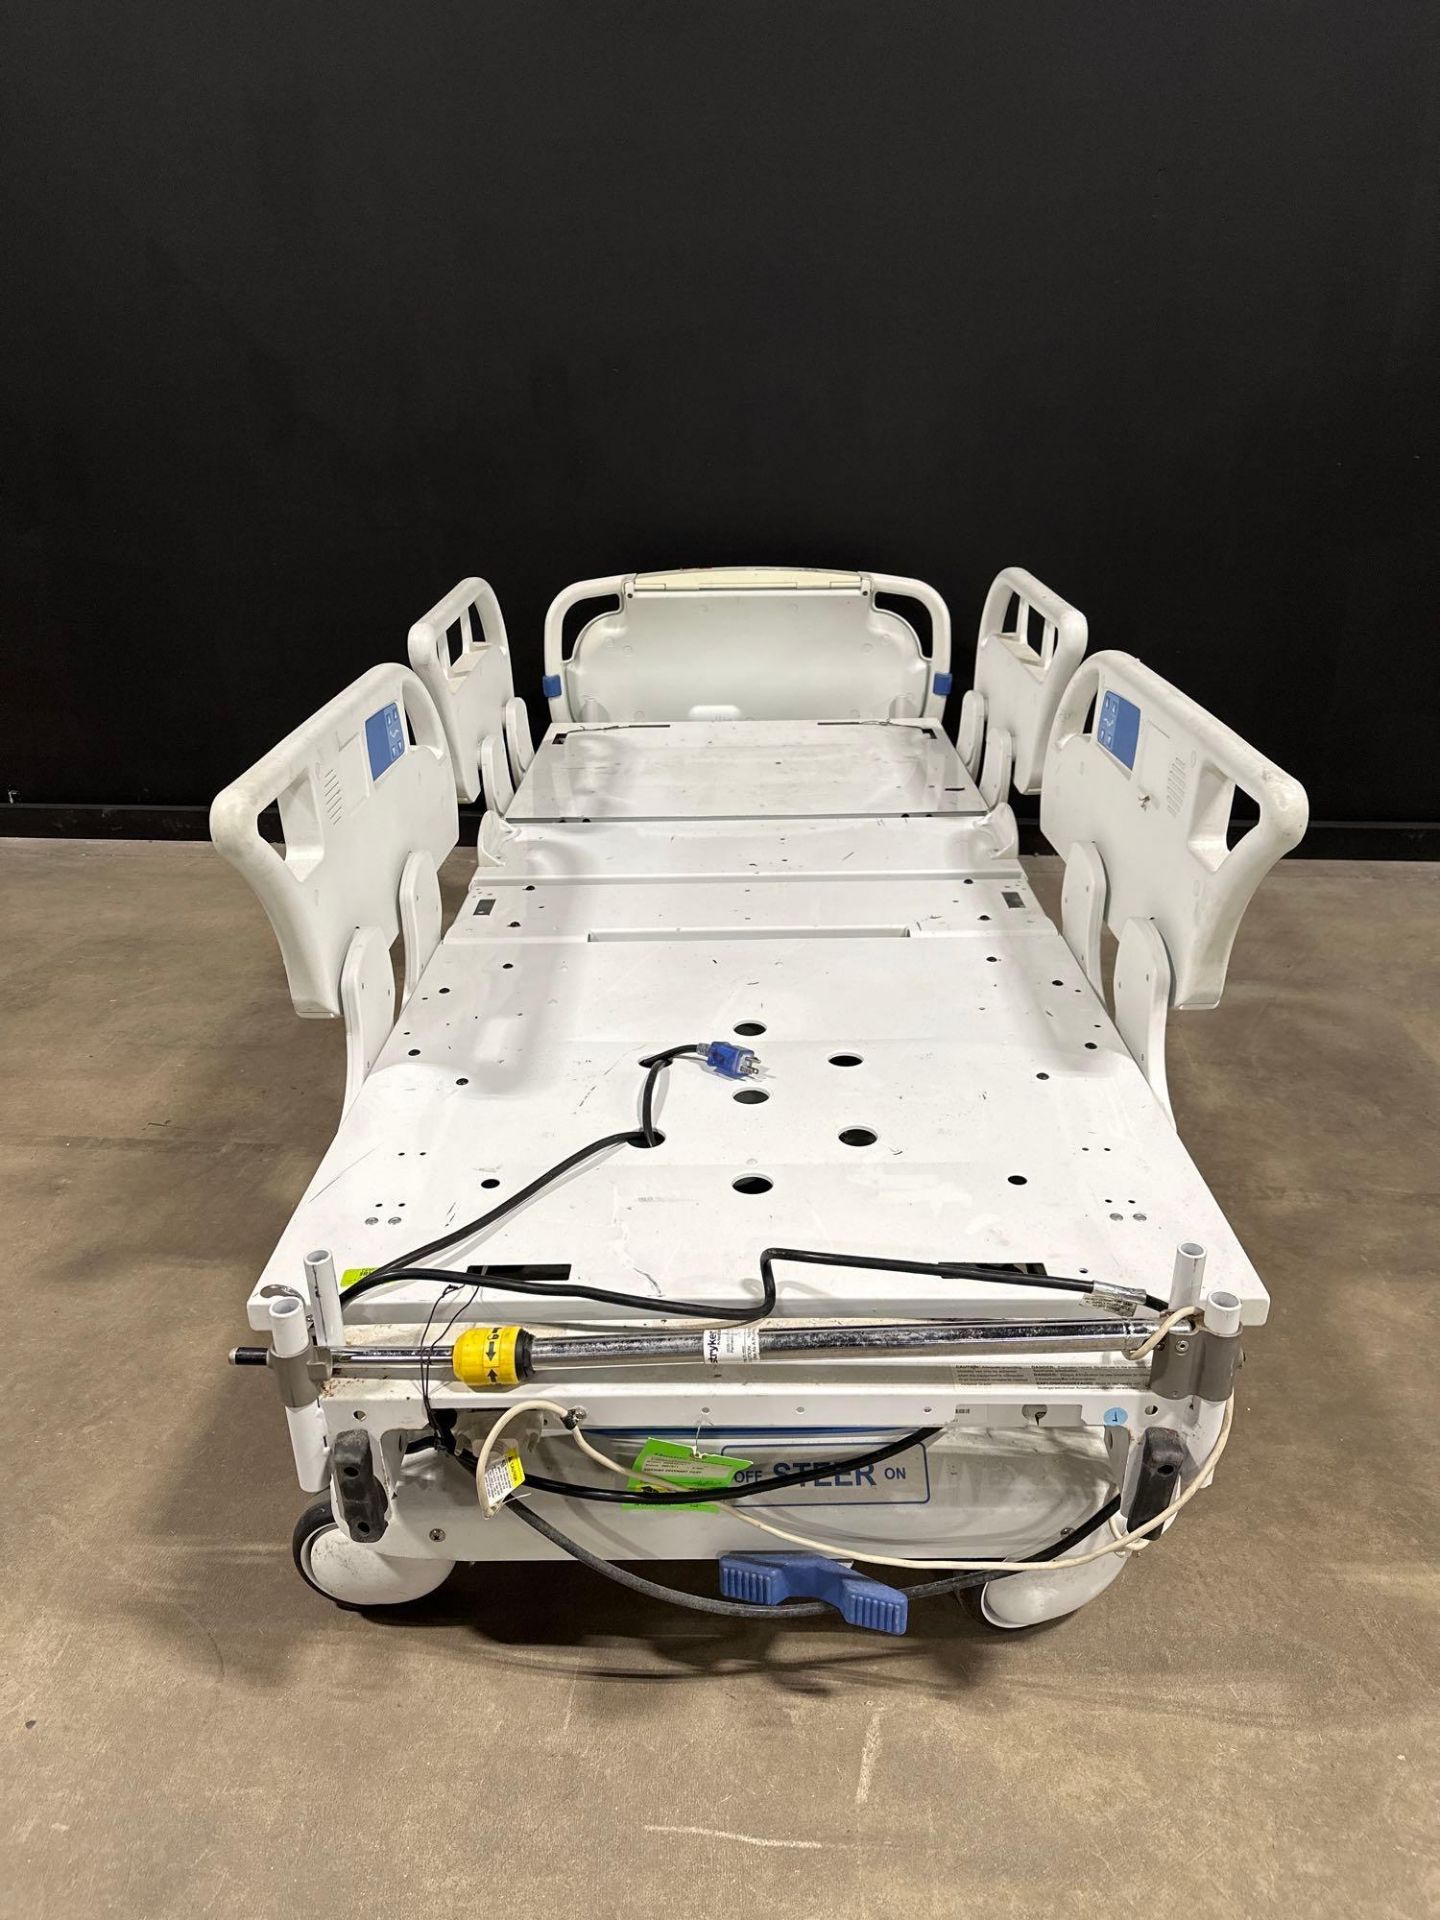 STRYKER 3005 S3 HOSPITAL BED - Image 4 of 4